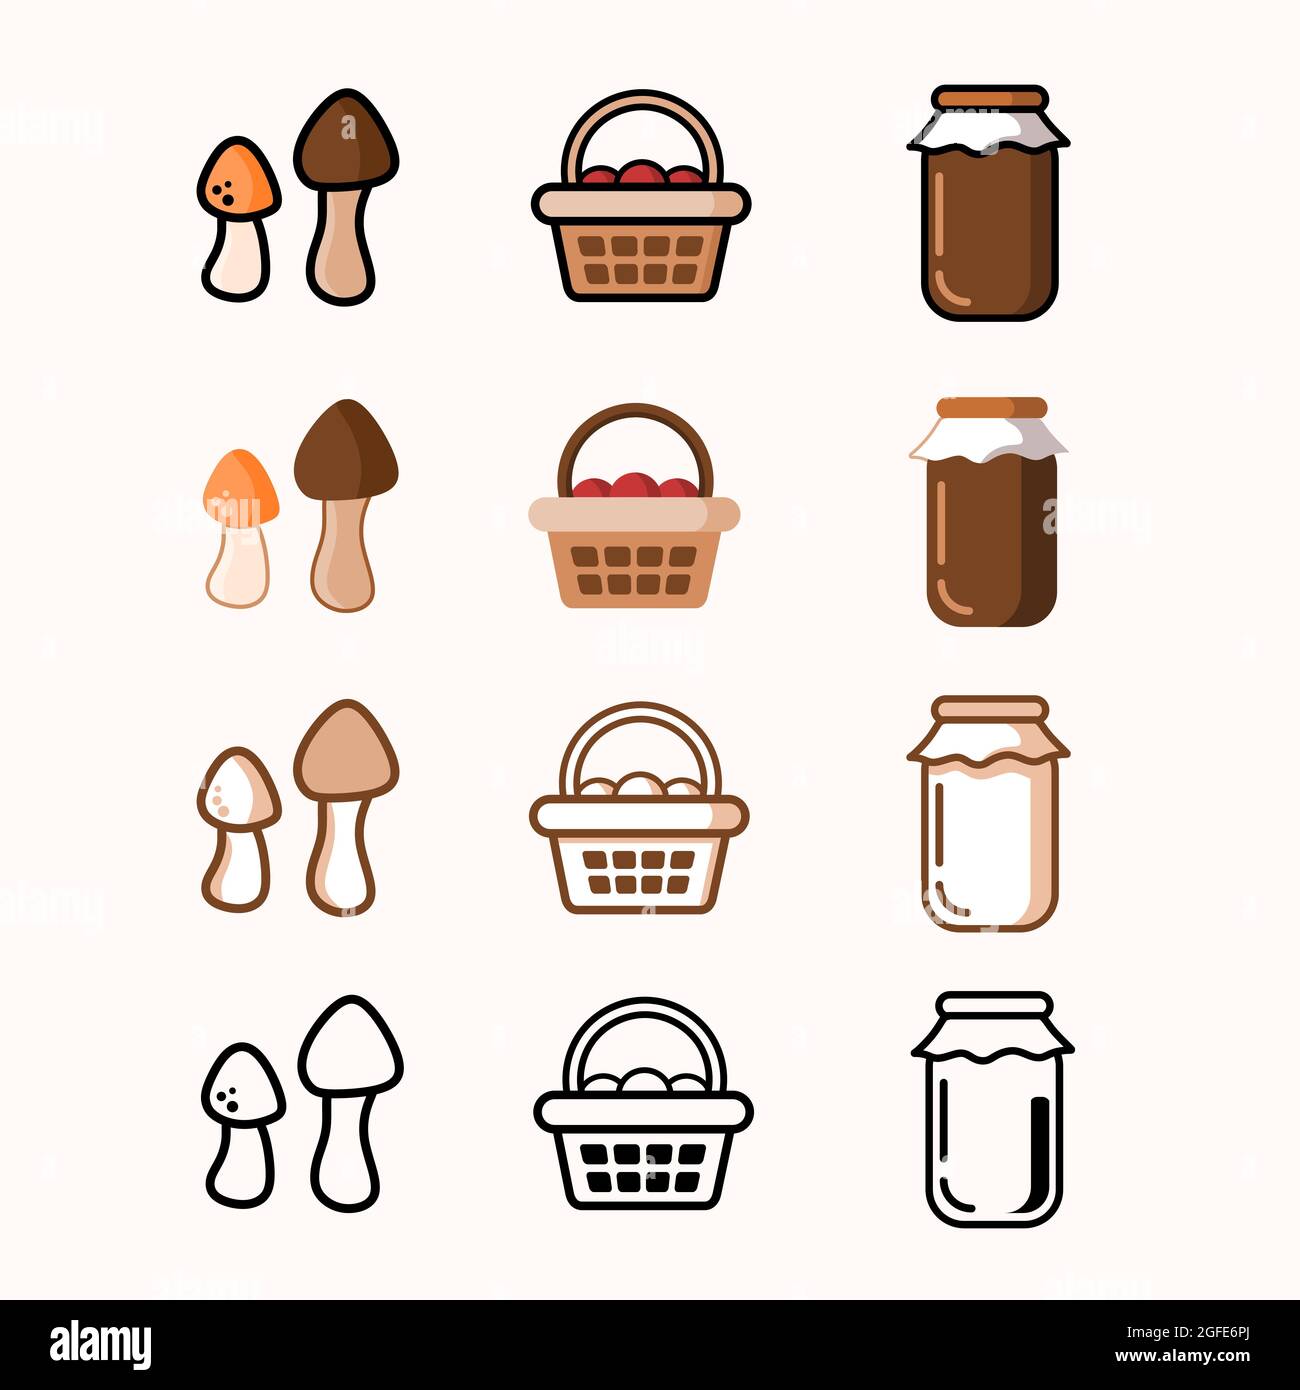 autumn icon set vector with different style additional image can be edit layer by layer Stock Vector